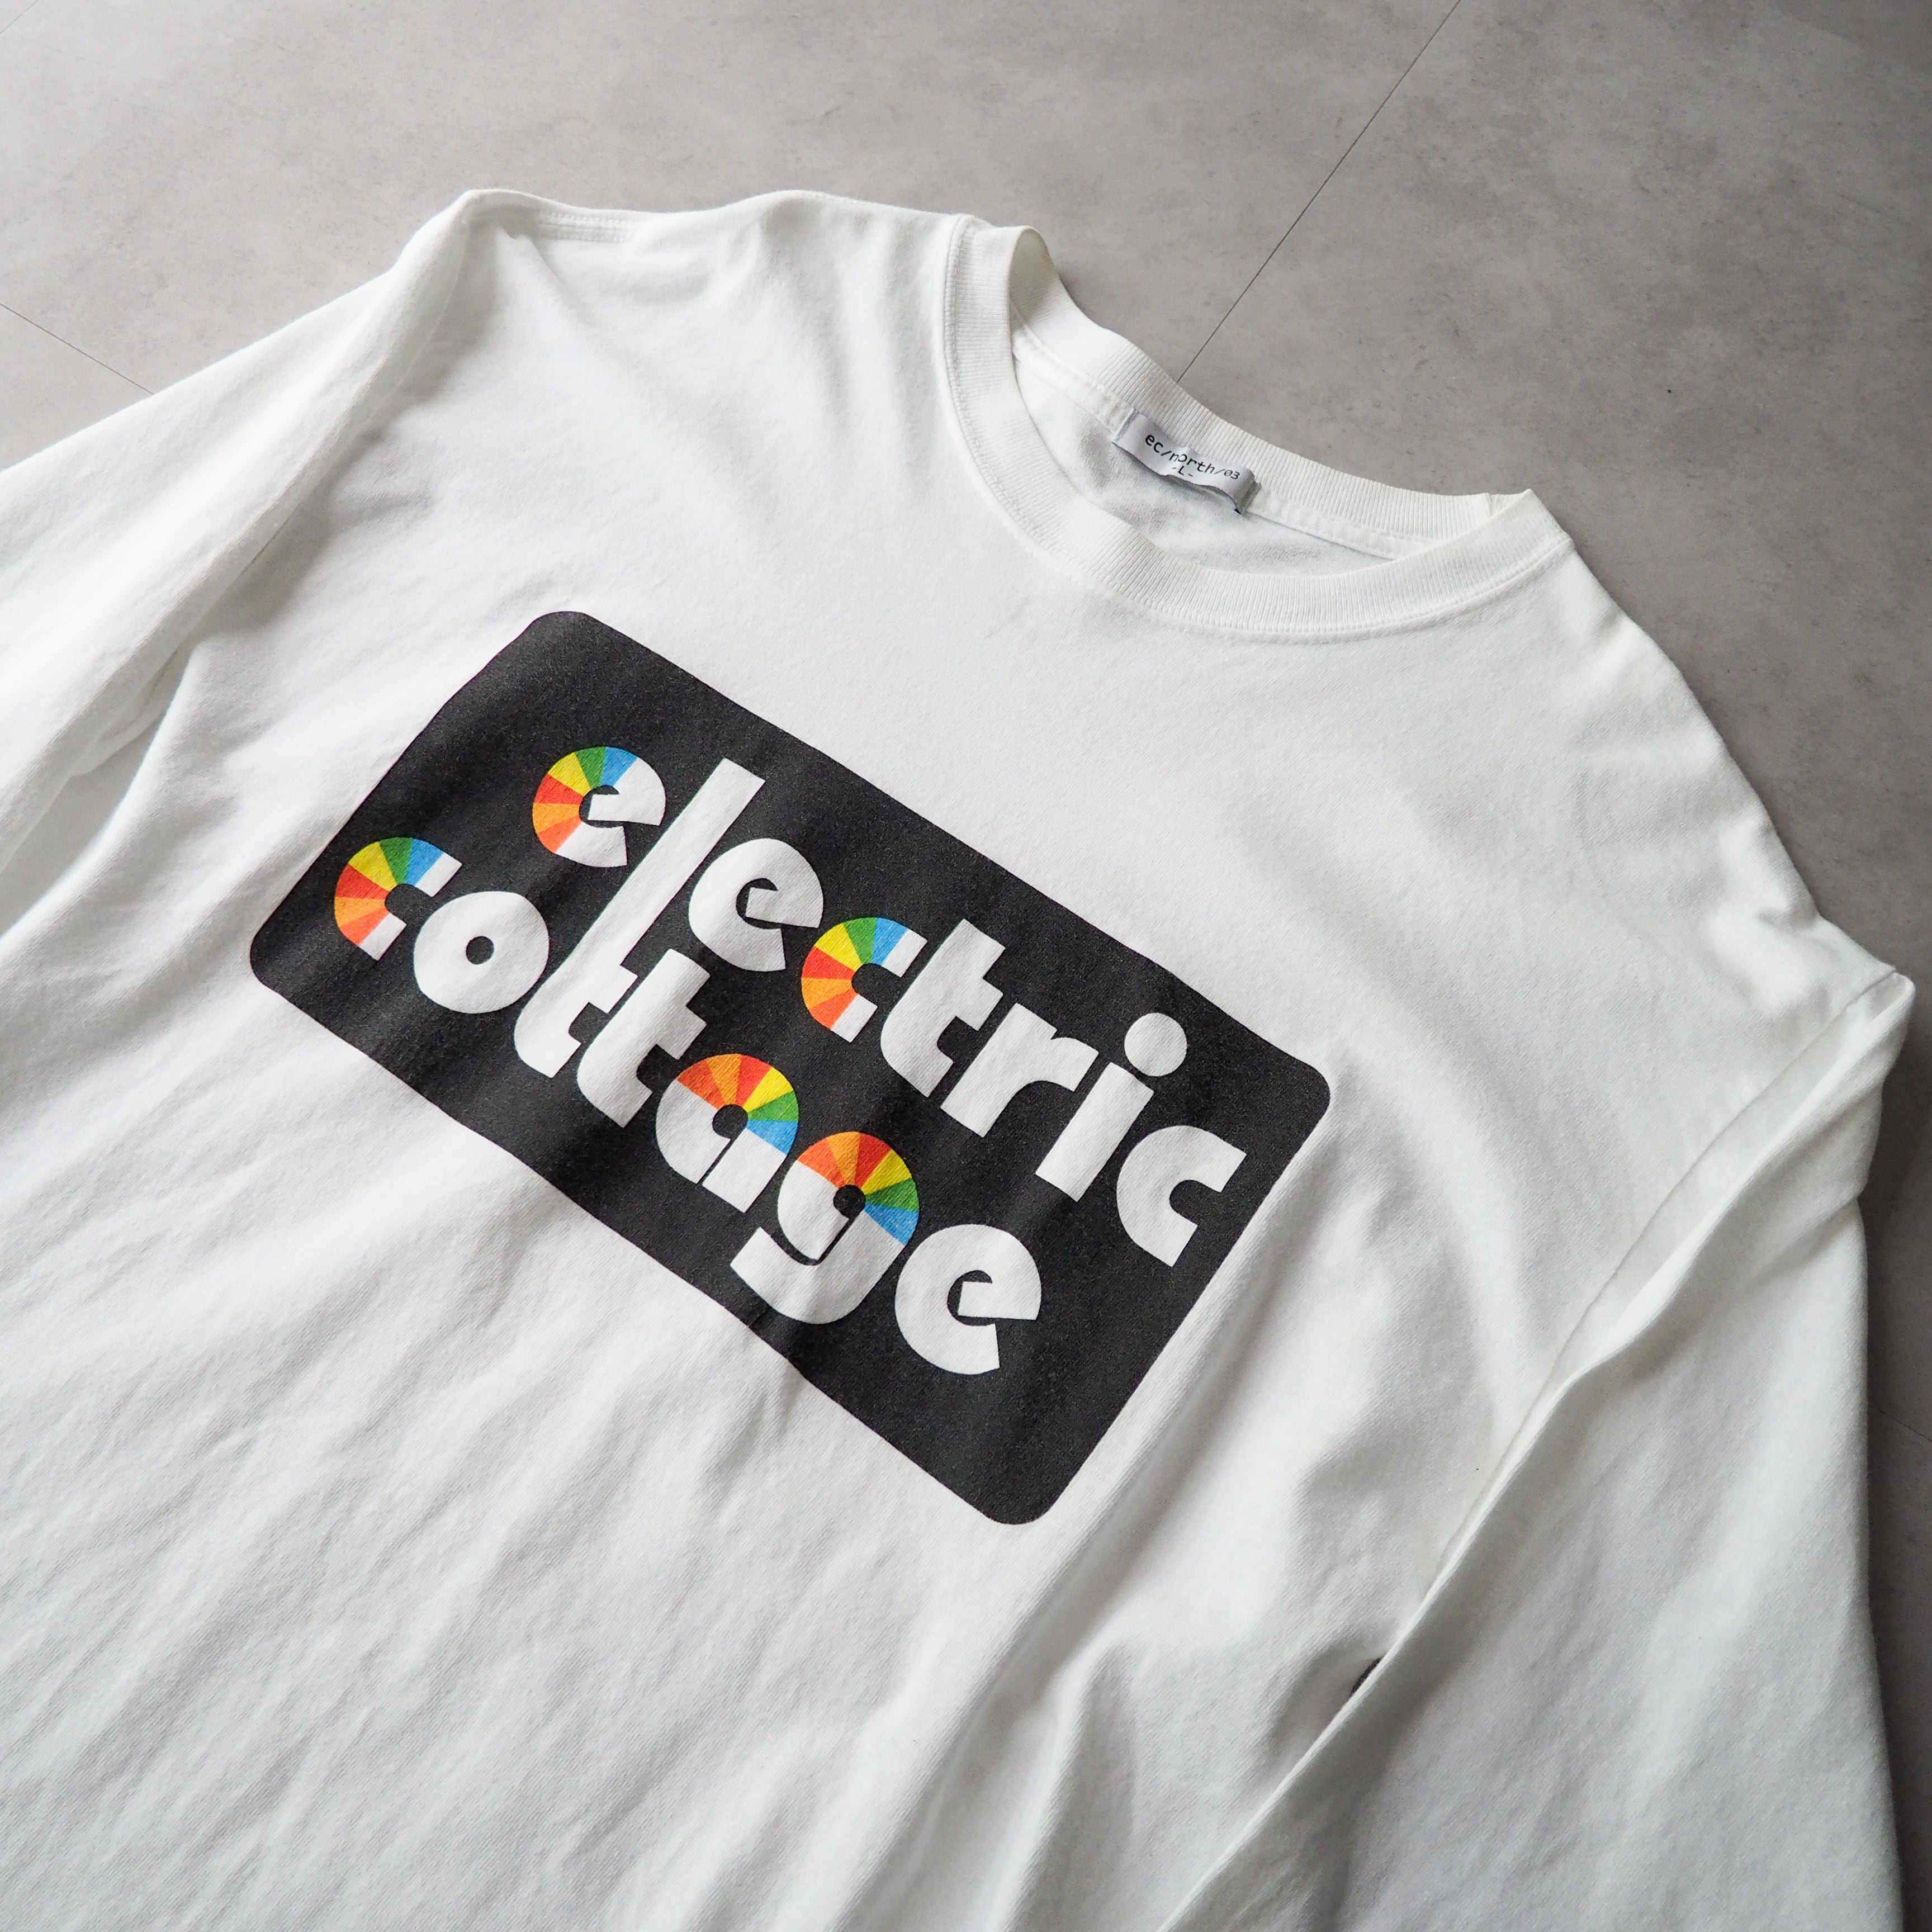 2003s “ELECTRIC COTAGE” logo long sleeve tee エレクトリック